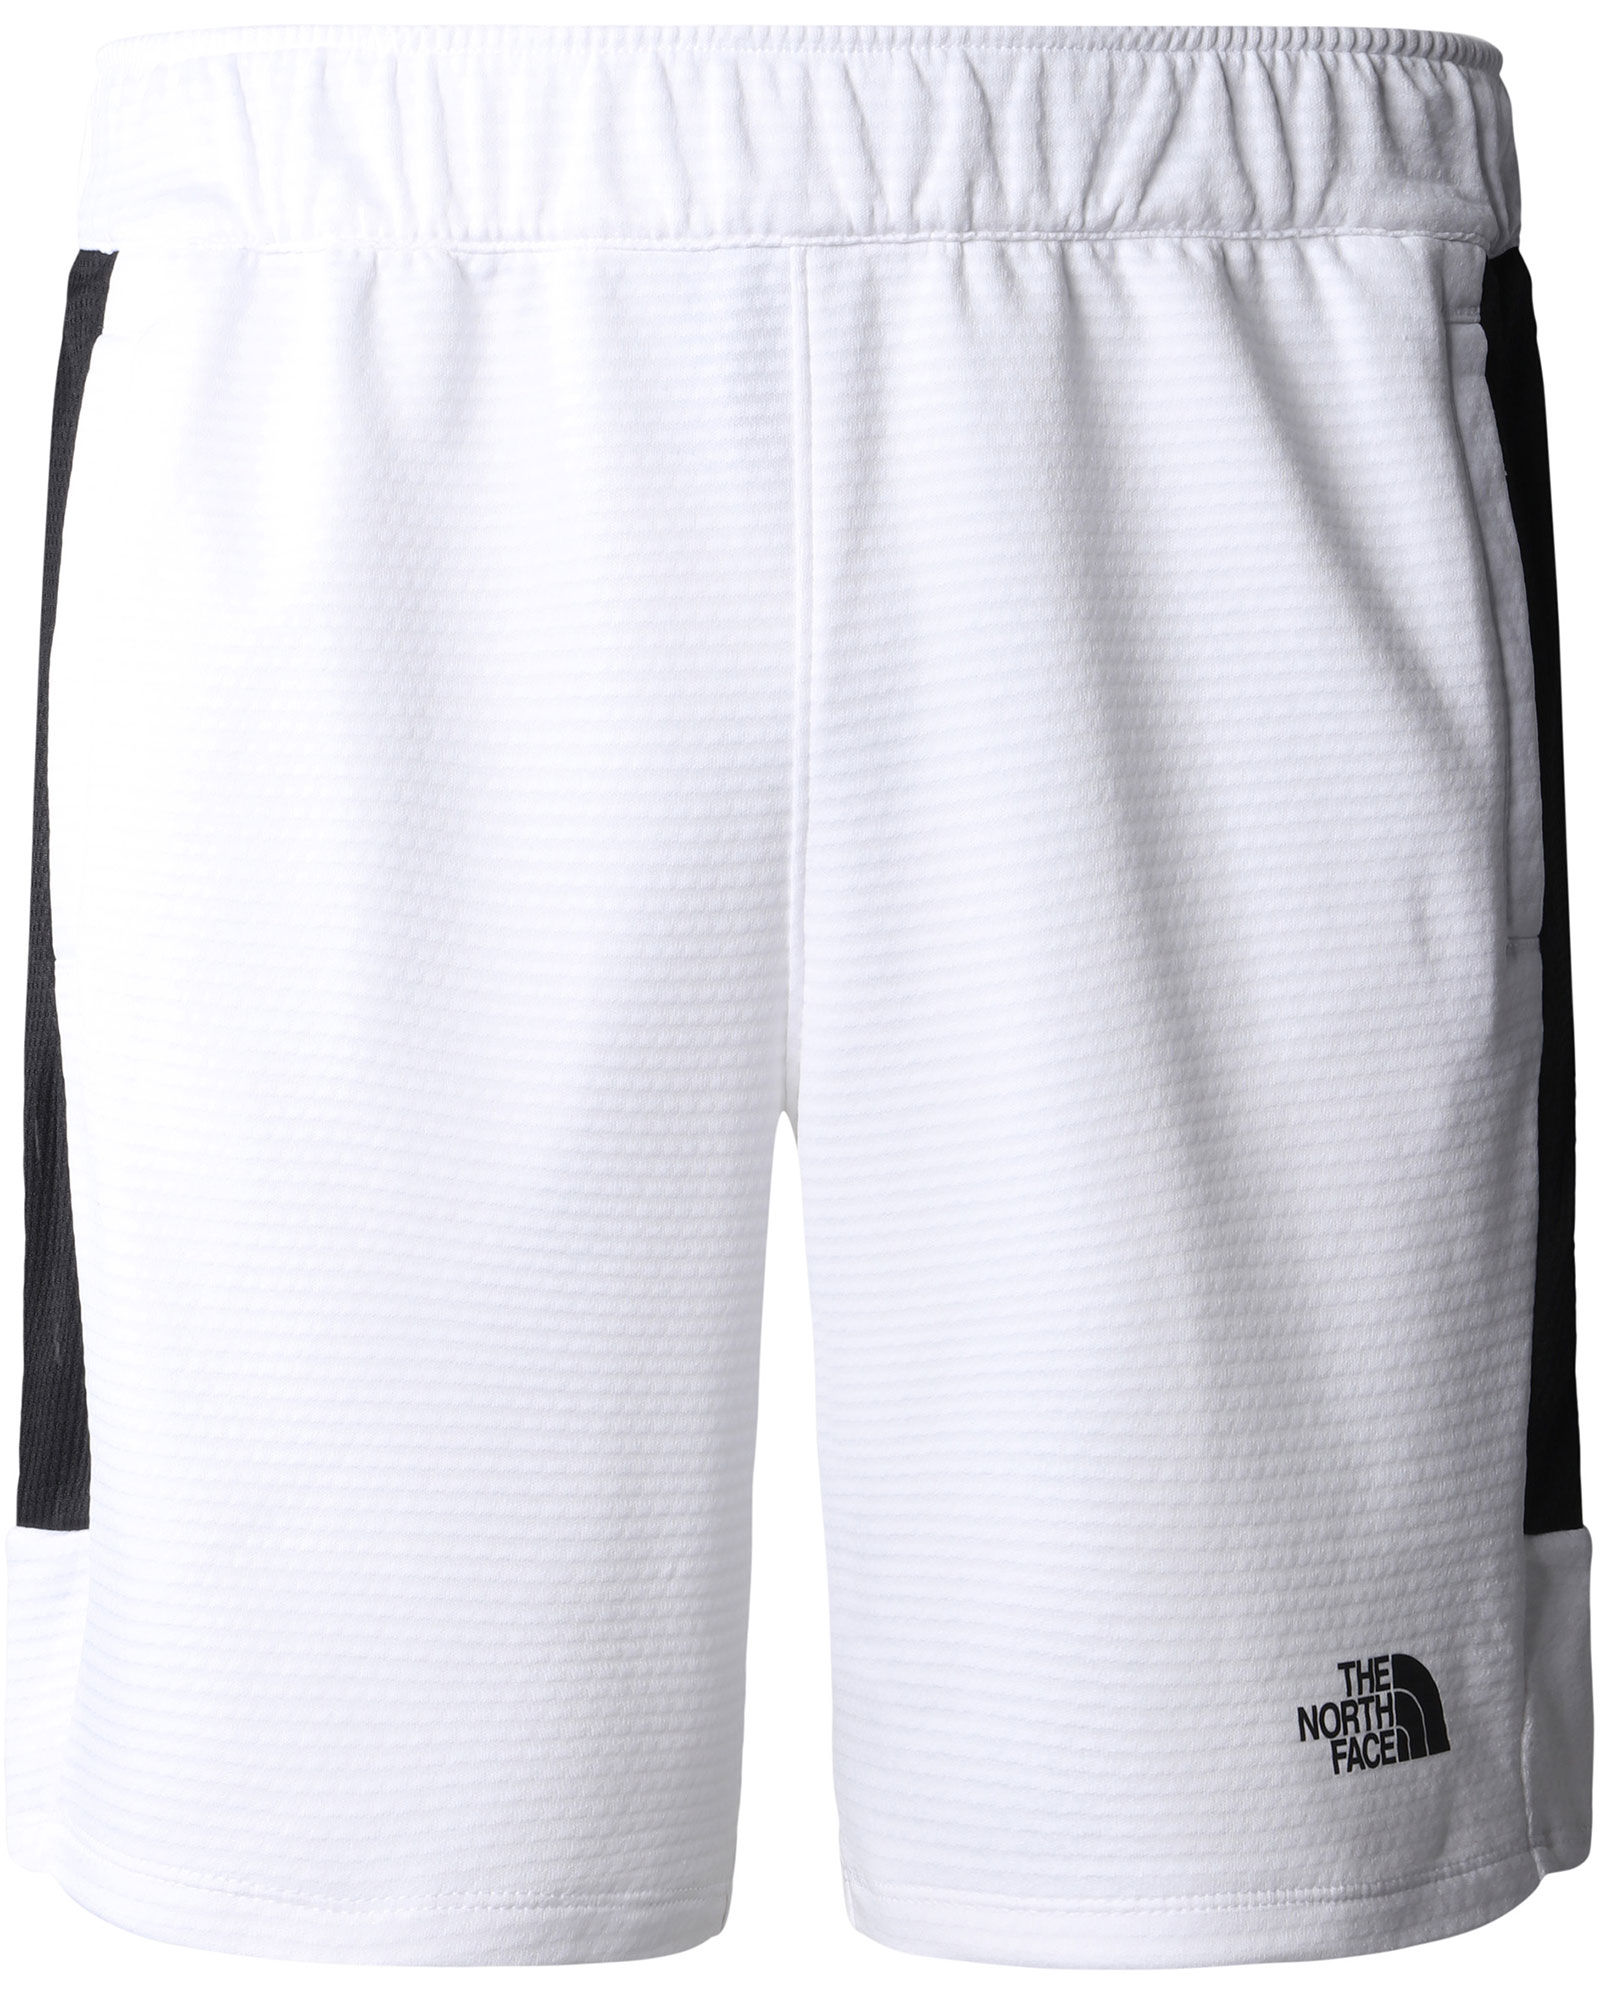 Product image of The North Face Men's MA Fleece Shorts